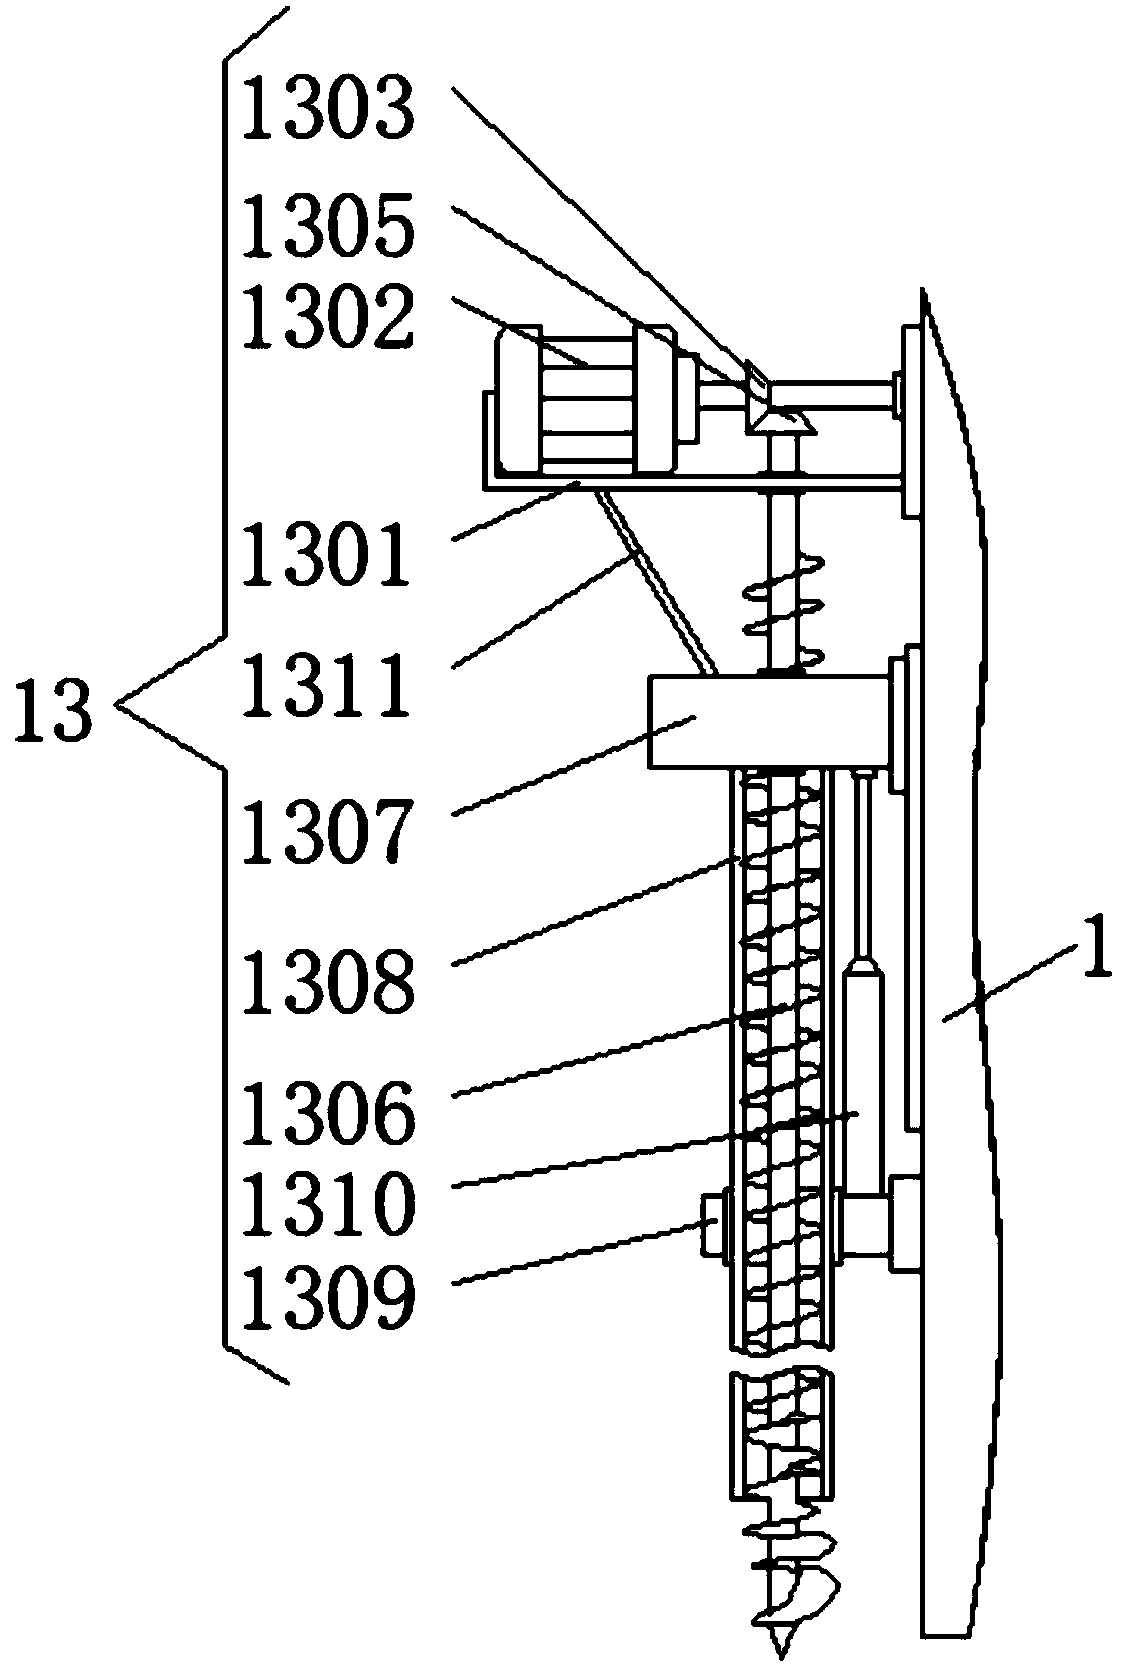 Soil collecting device with storage and detection functions